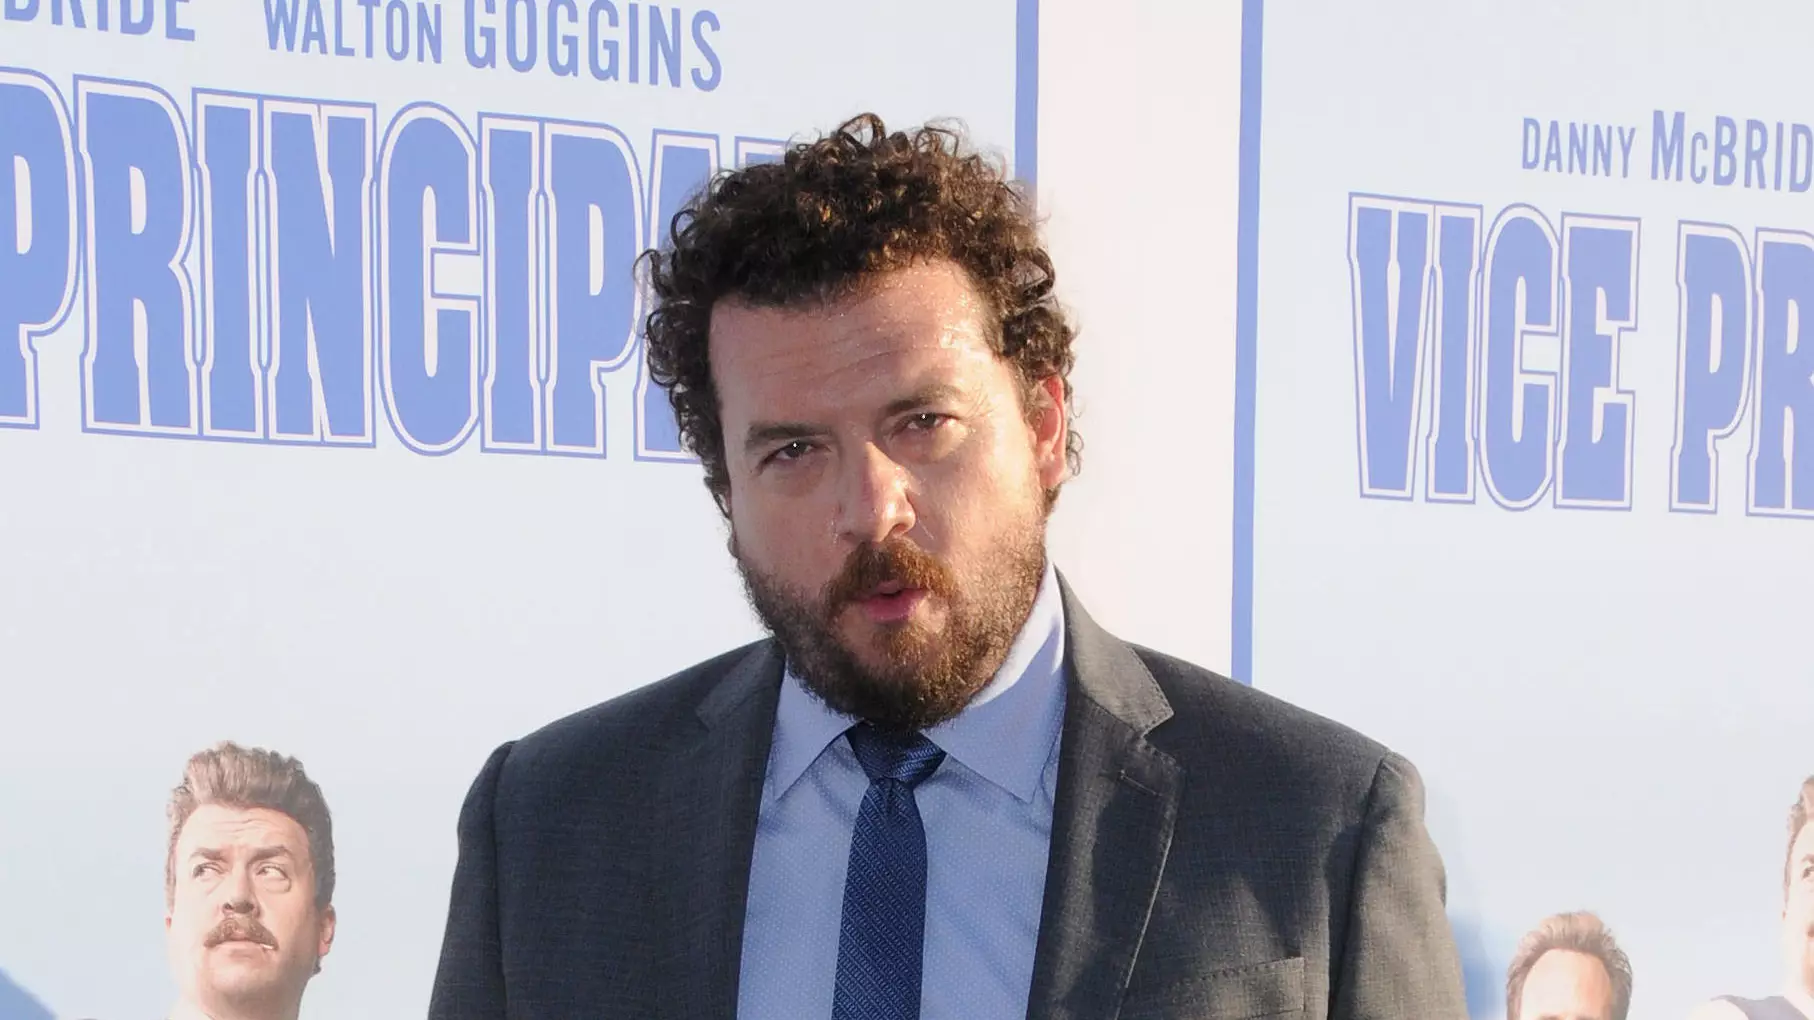 Danny McBride To Star In New Show That Sends Up Televangelism 